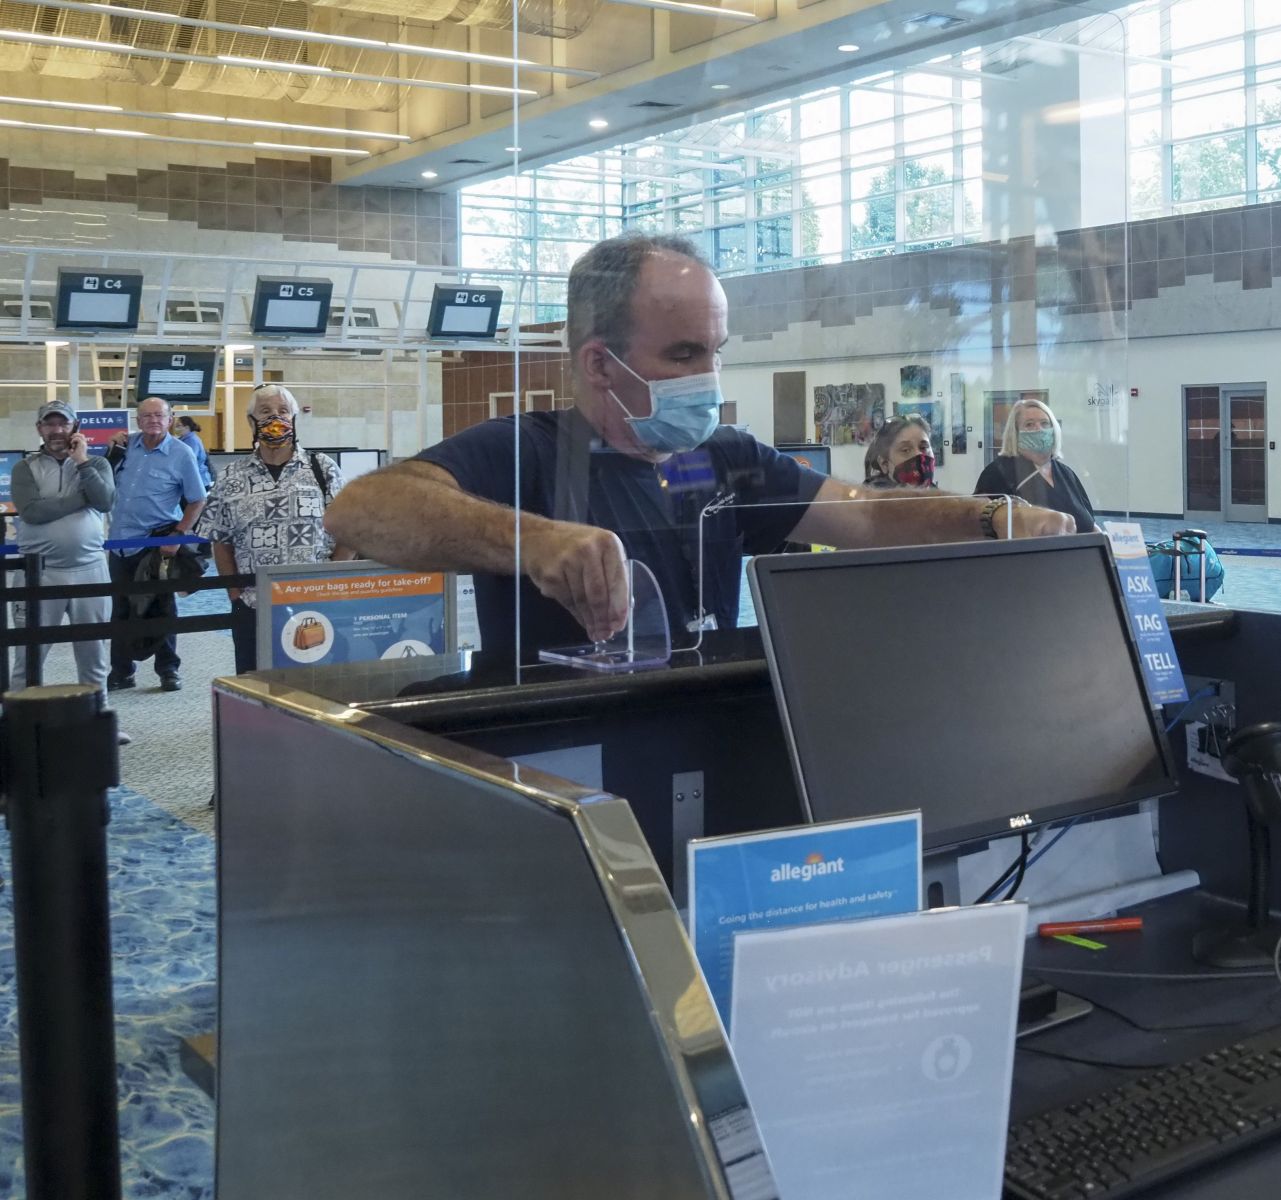 Airport staff installs sneeze guard at ticket counter.